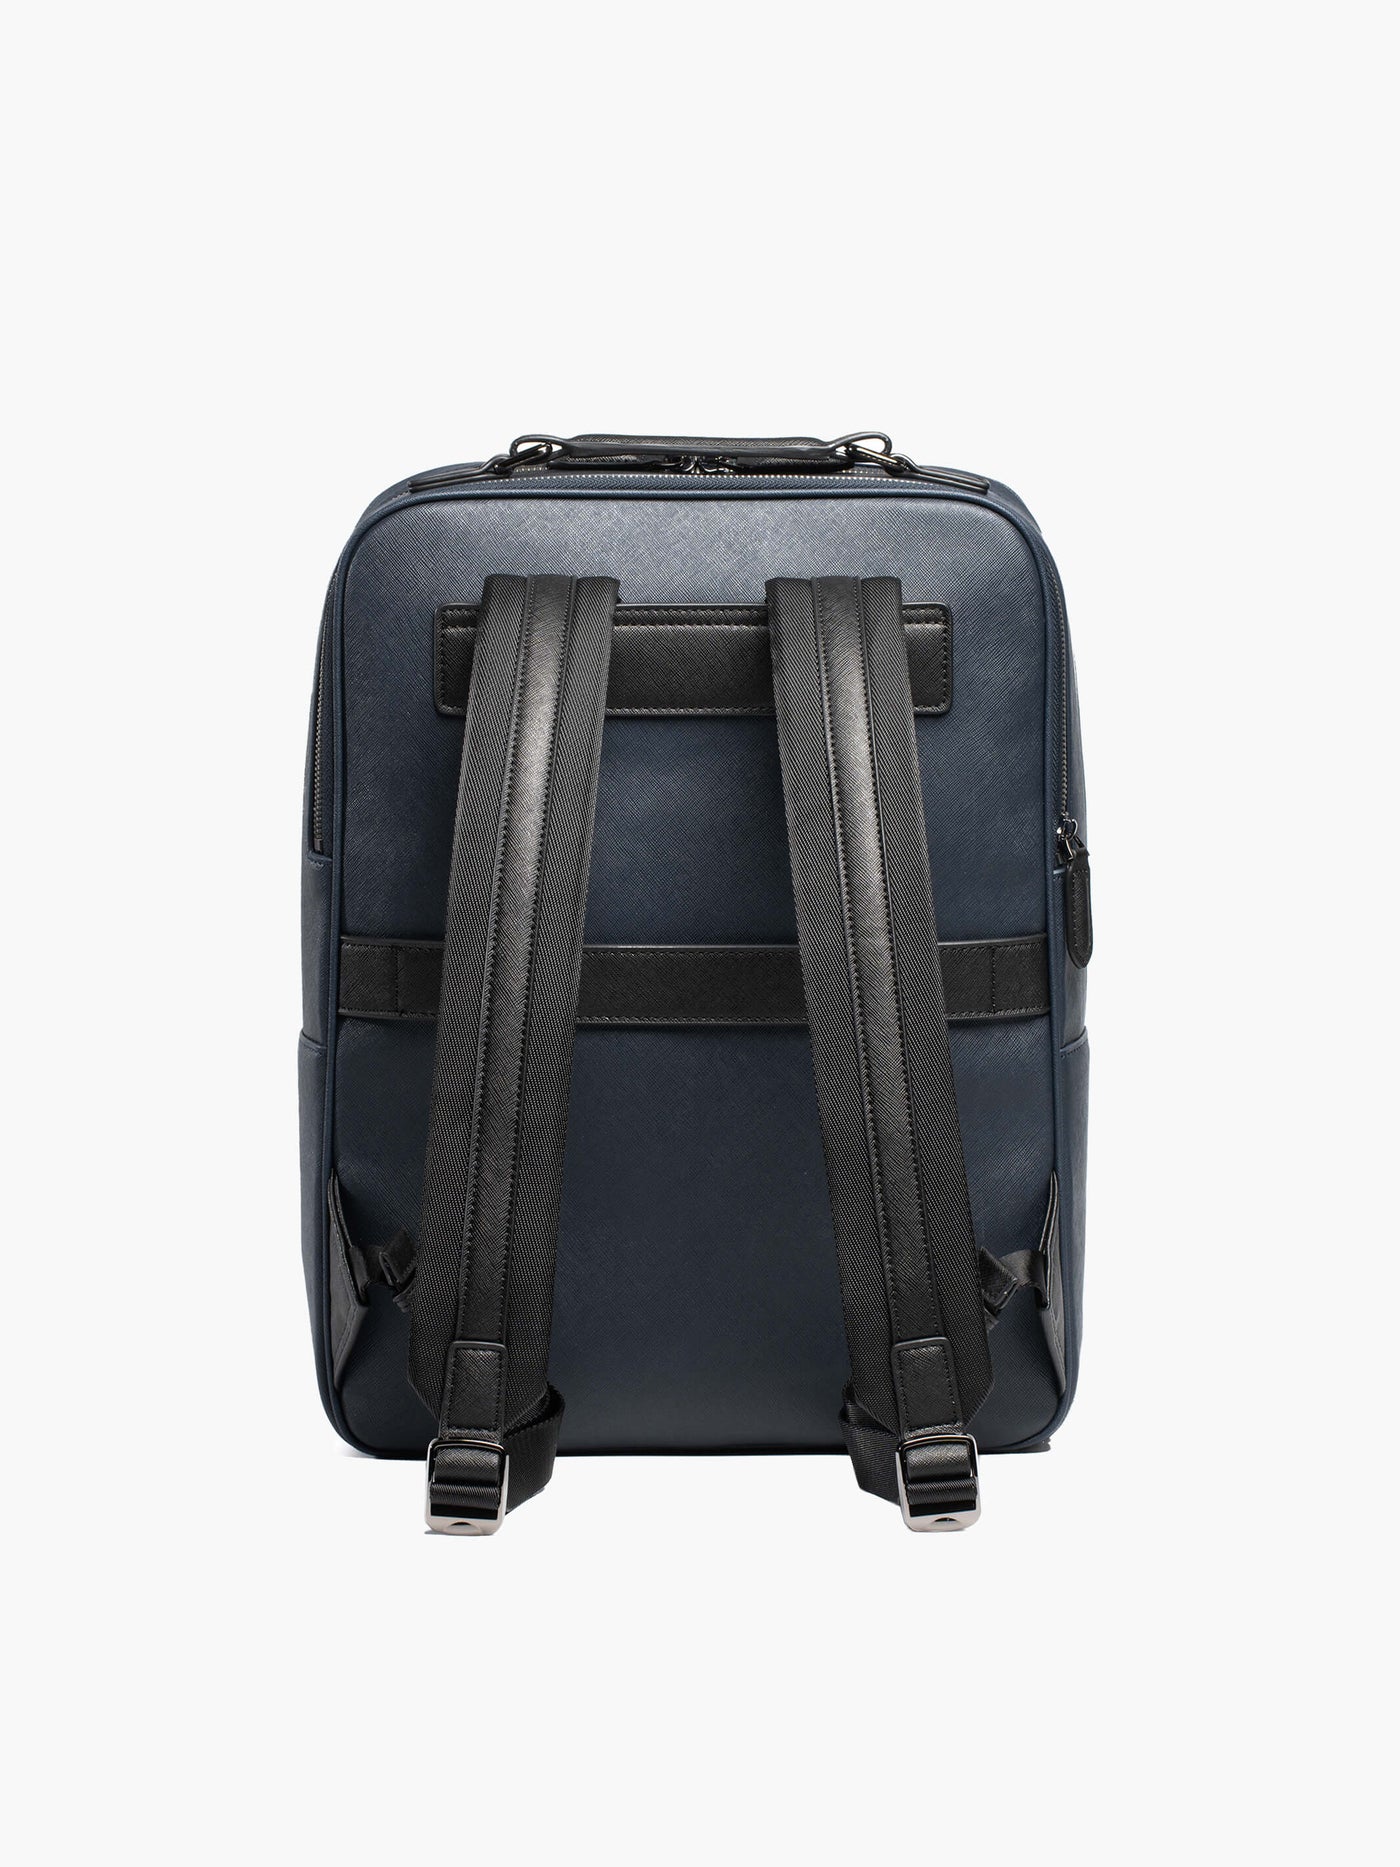 Maverick & Co. Earthen Recycled Leather Backpack in Black